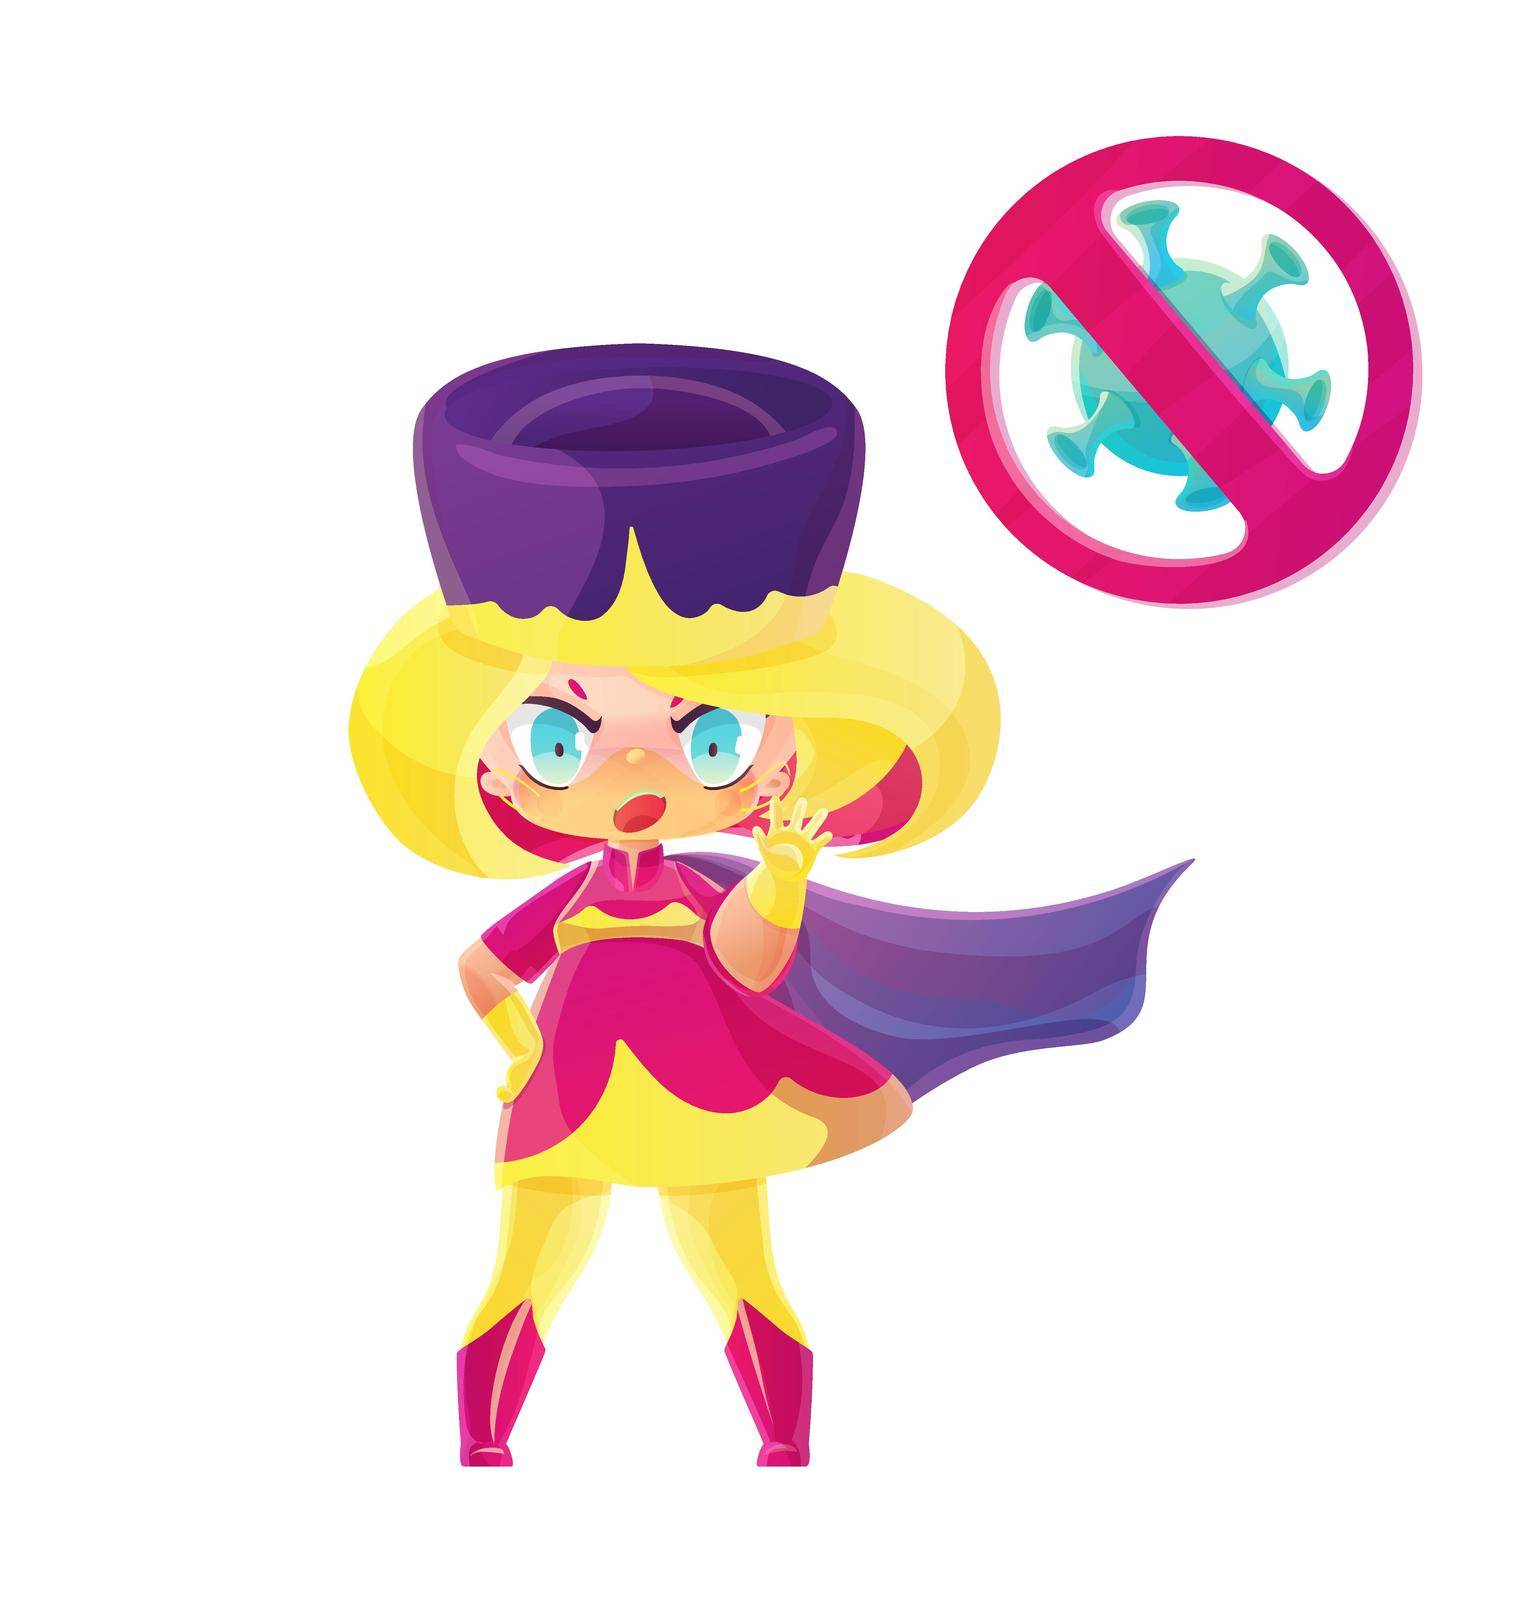 Superhero nurse with stop the pandemic sign by Xeniasnowstorm